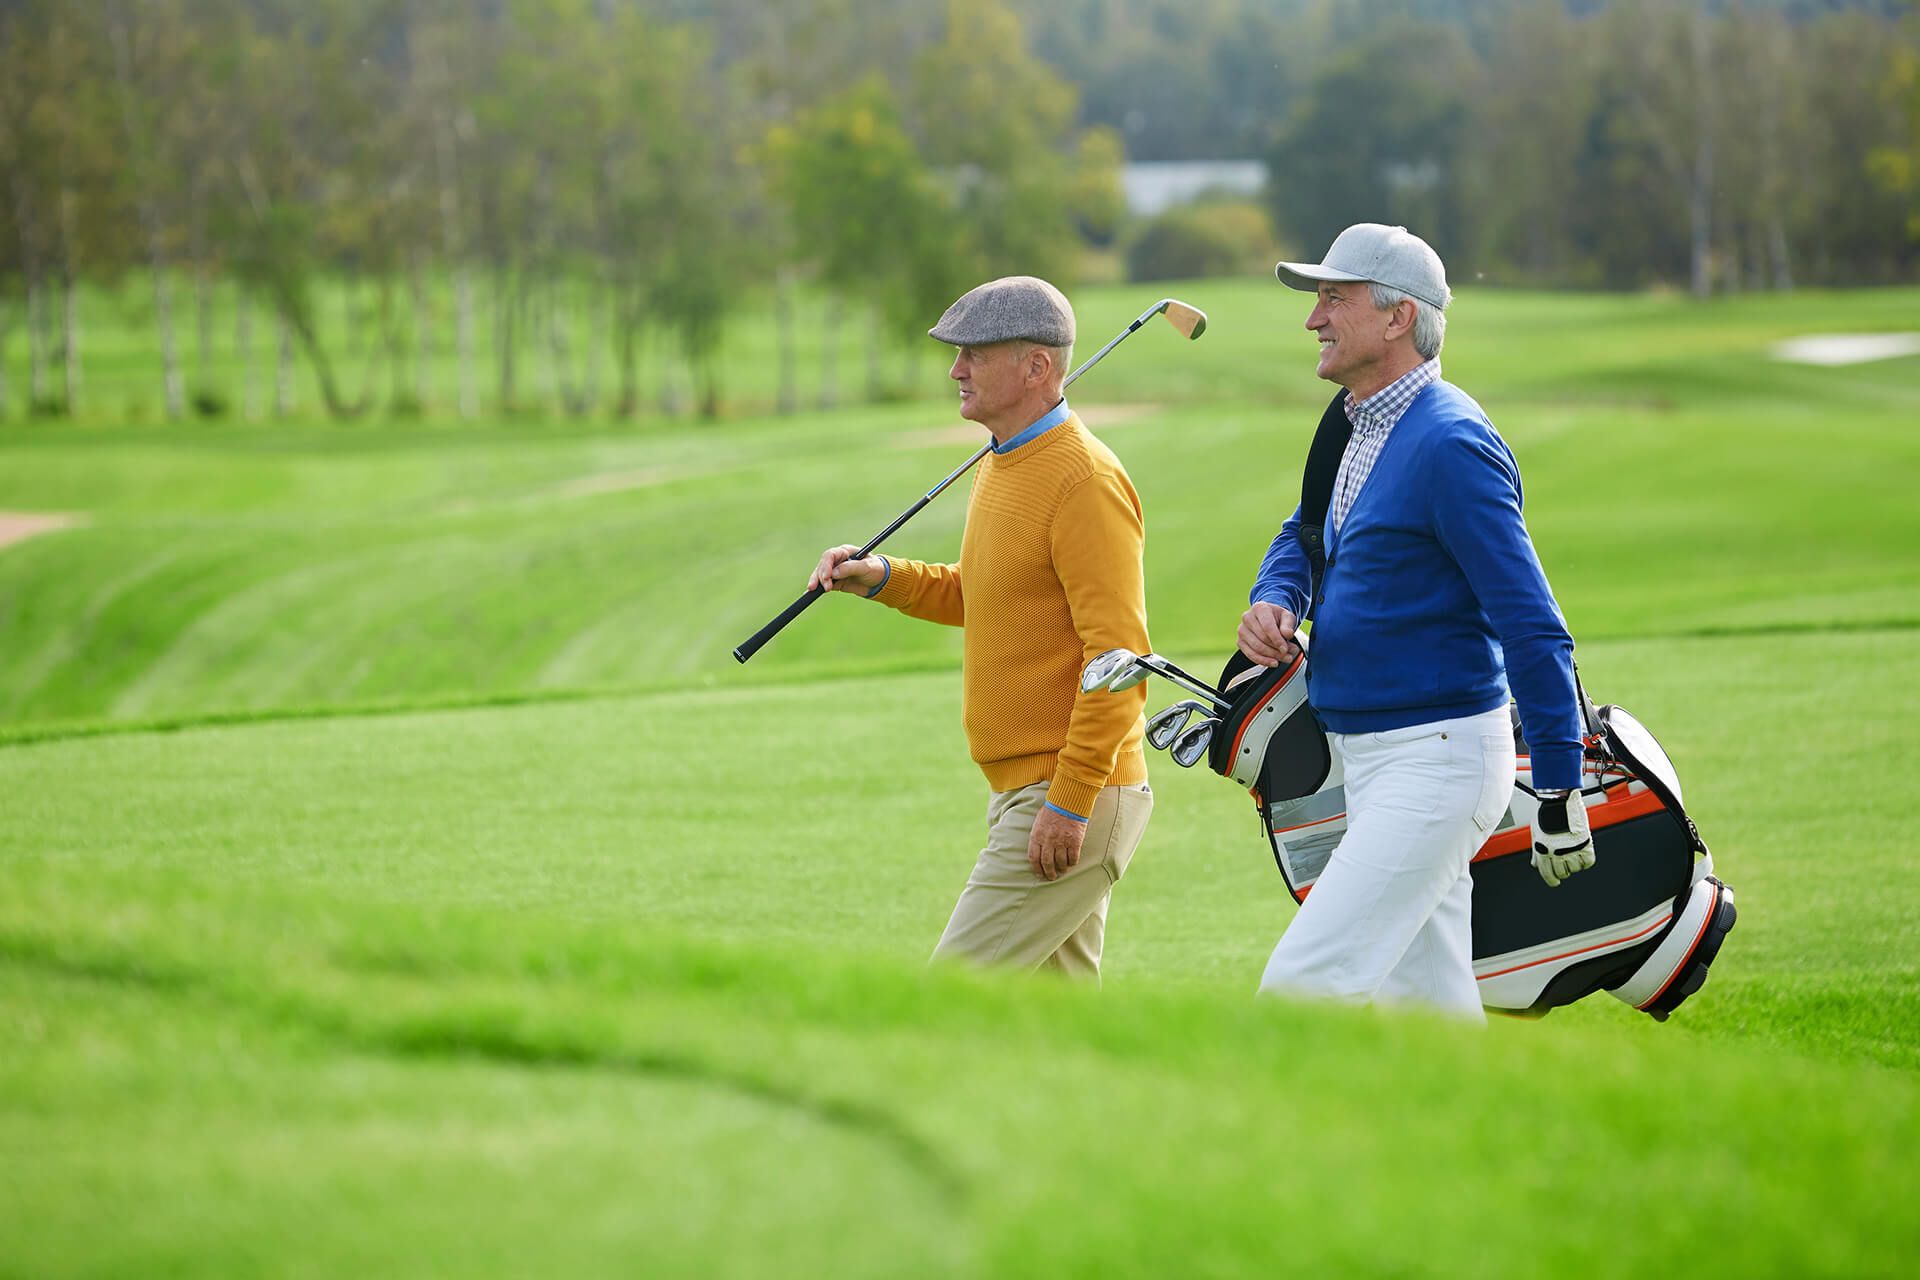 two men are walking on a golf course carrying golf clubs .